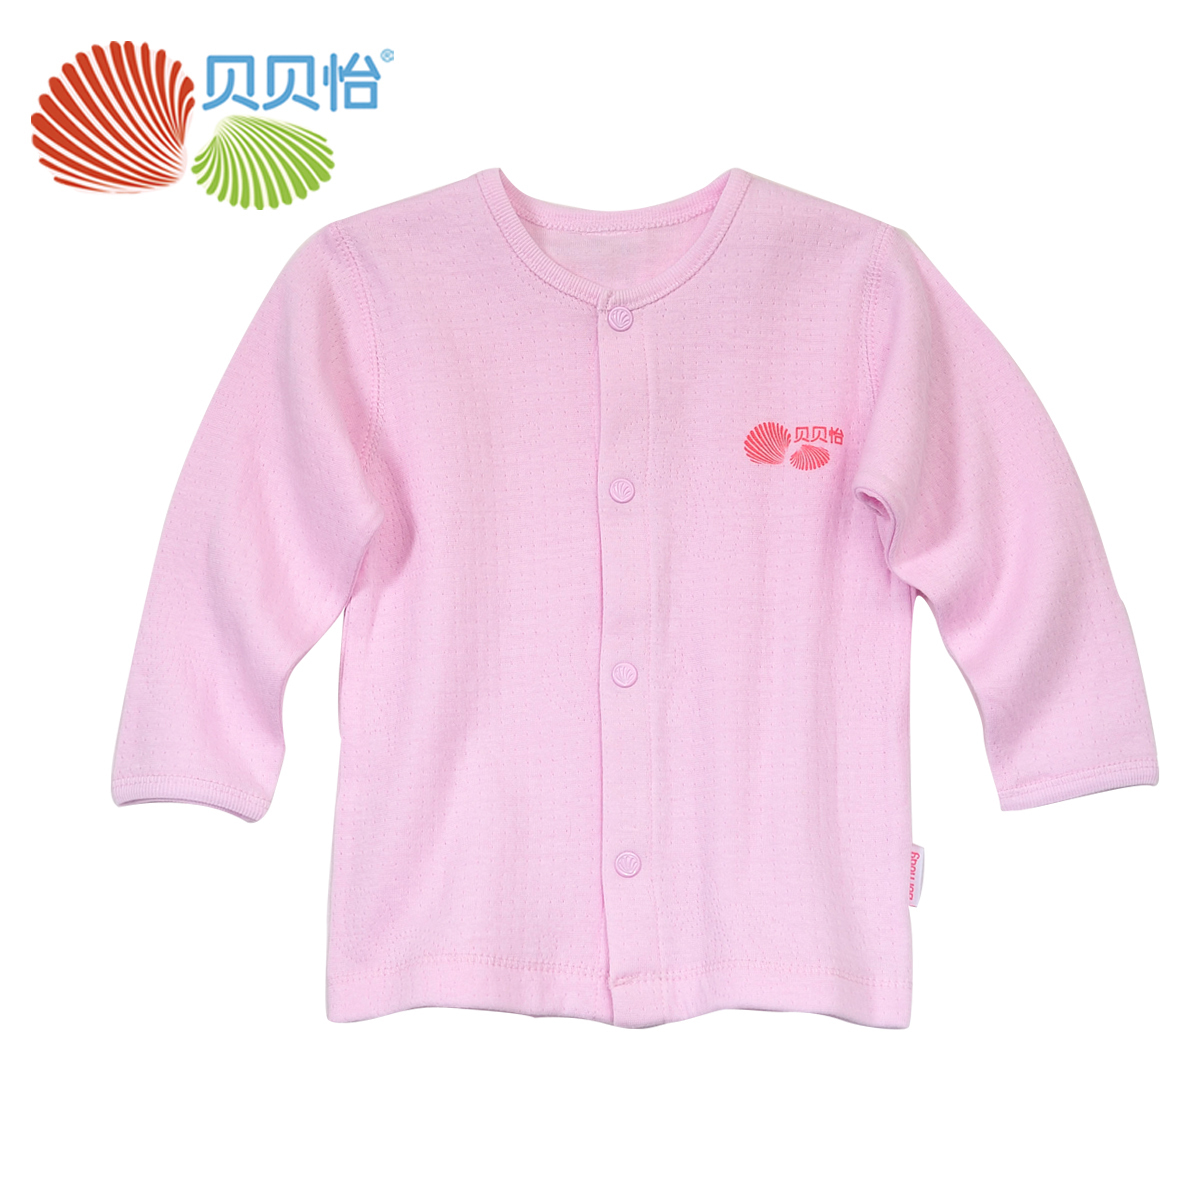 Double layer super soft series baby before the open button belly clothing newborn male 100% cotton top 3020